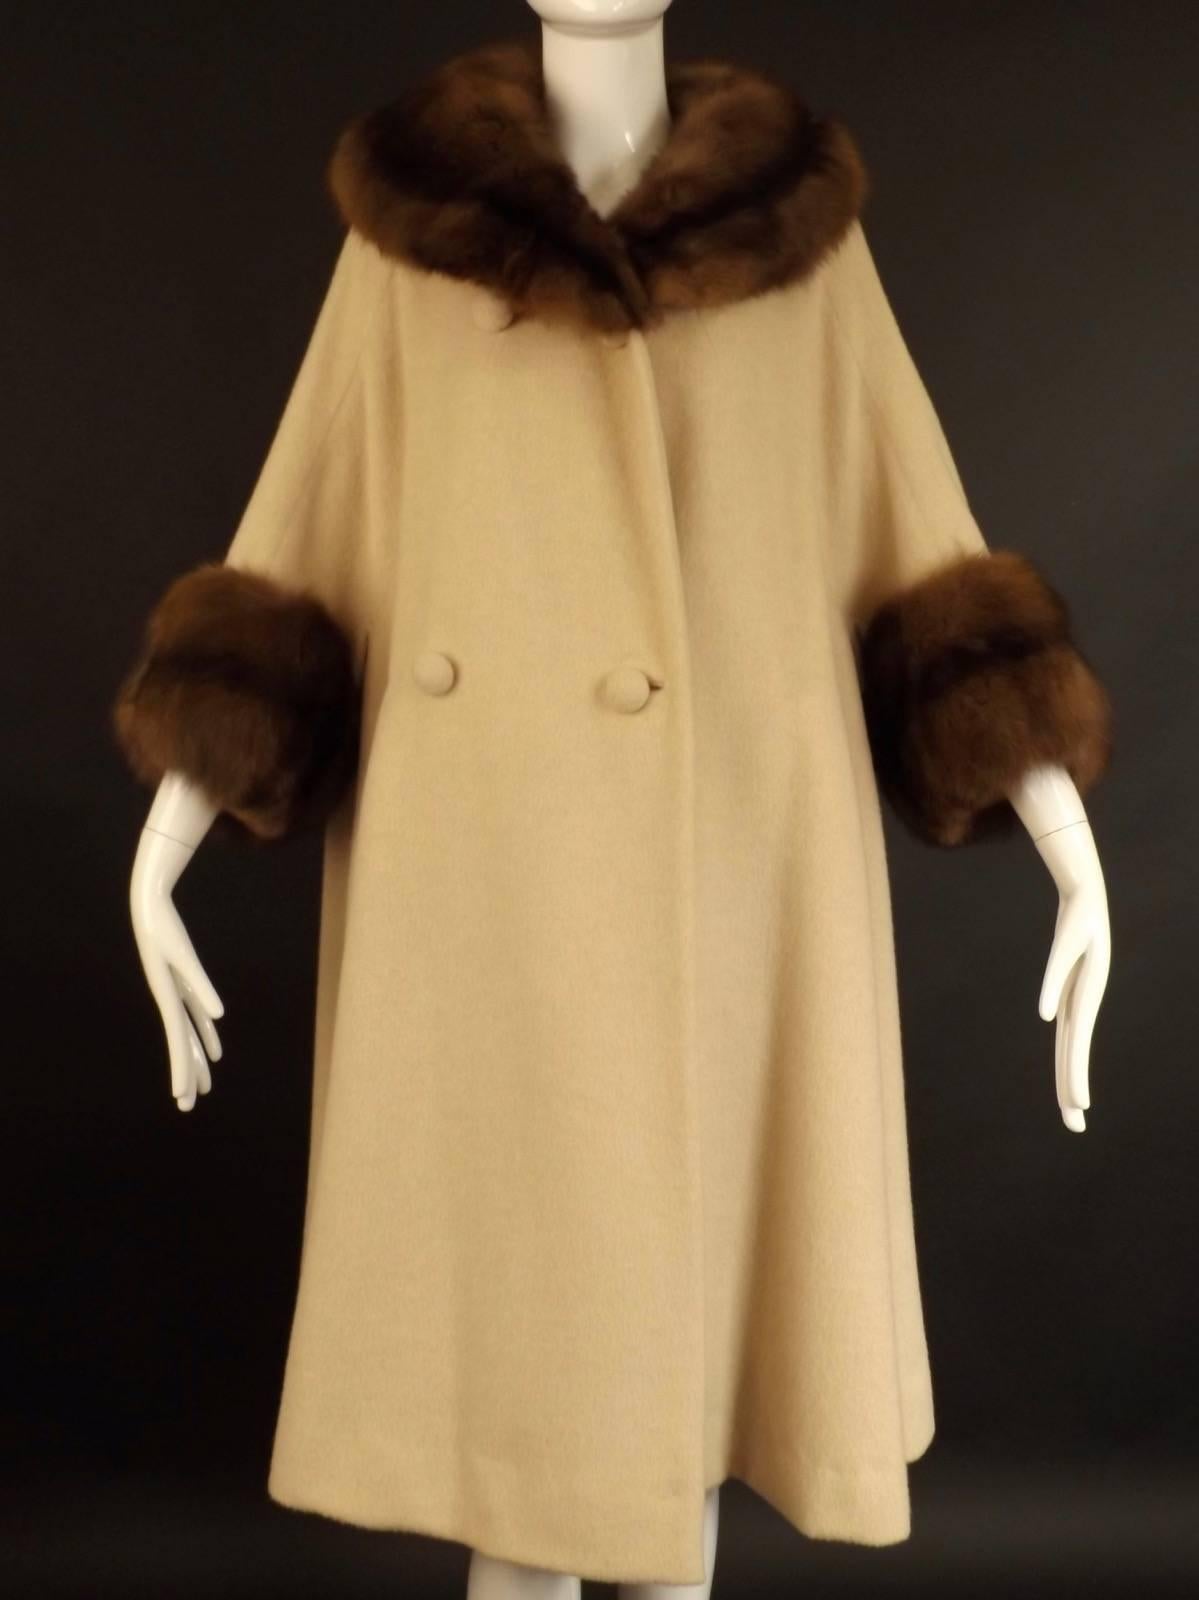 Gorgeous coat from the late 1950s, which if it is, was Designed by Marc Bohan, who left in 1960 to design for Dior. The coat is a plush wool with a wide sable collar and cuffs in mahogany.  The coat is double breasted  down right side and with